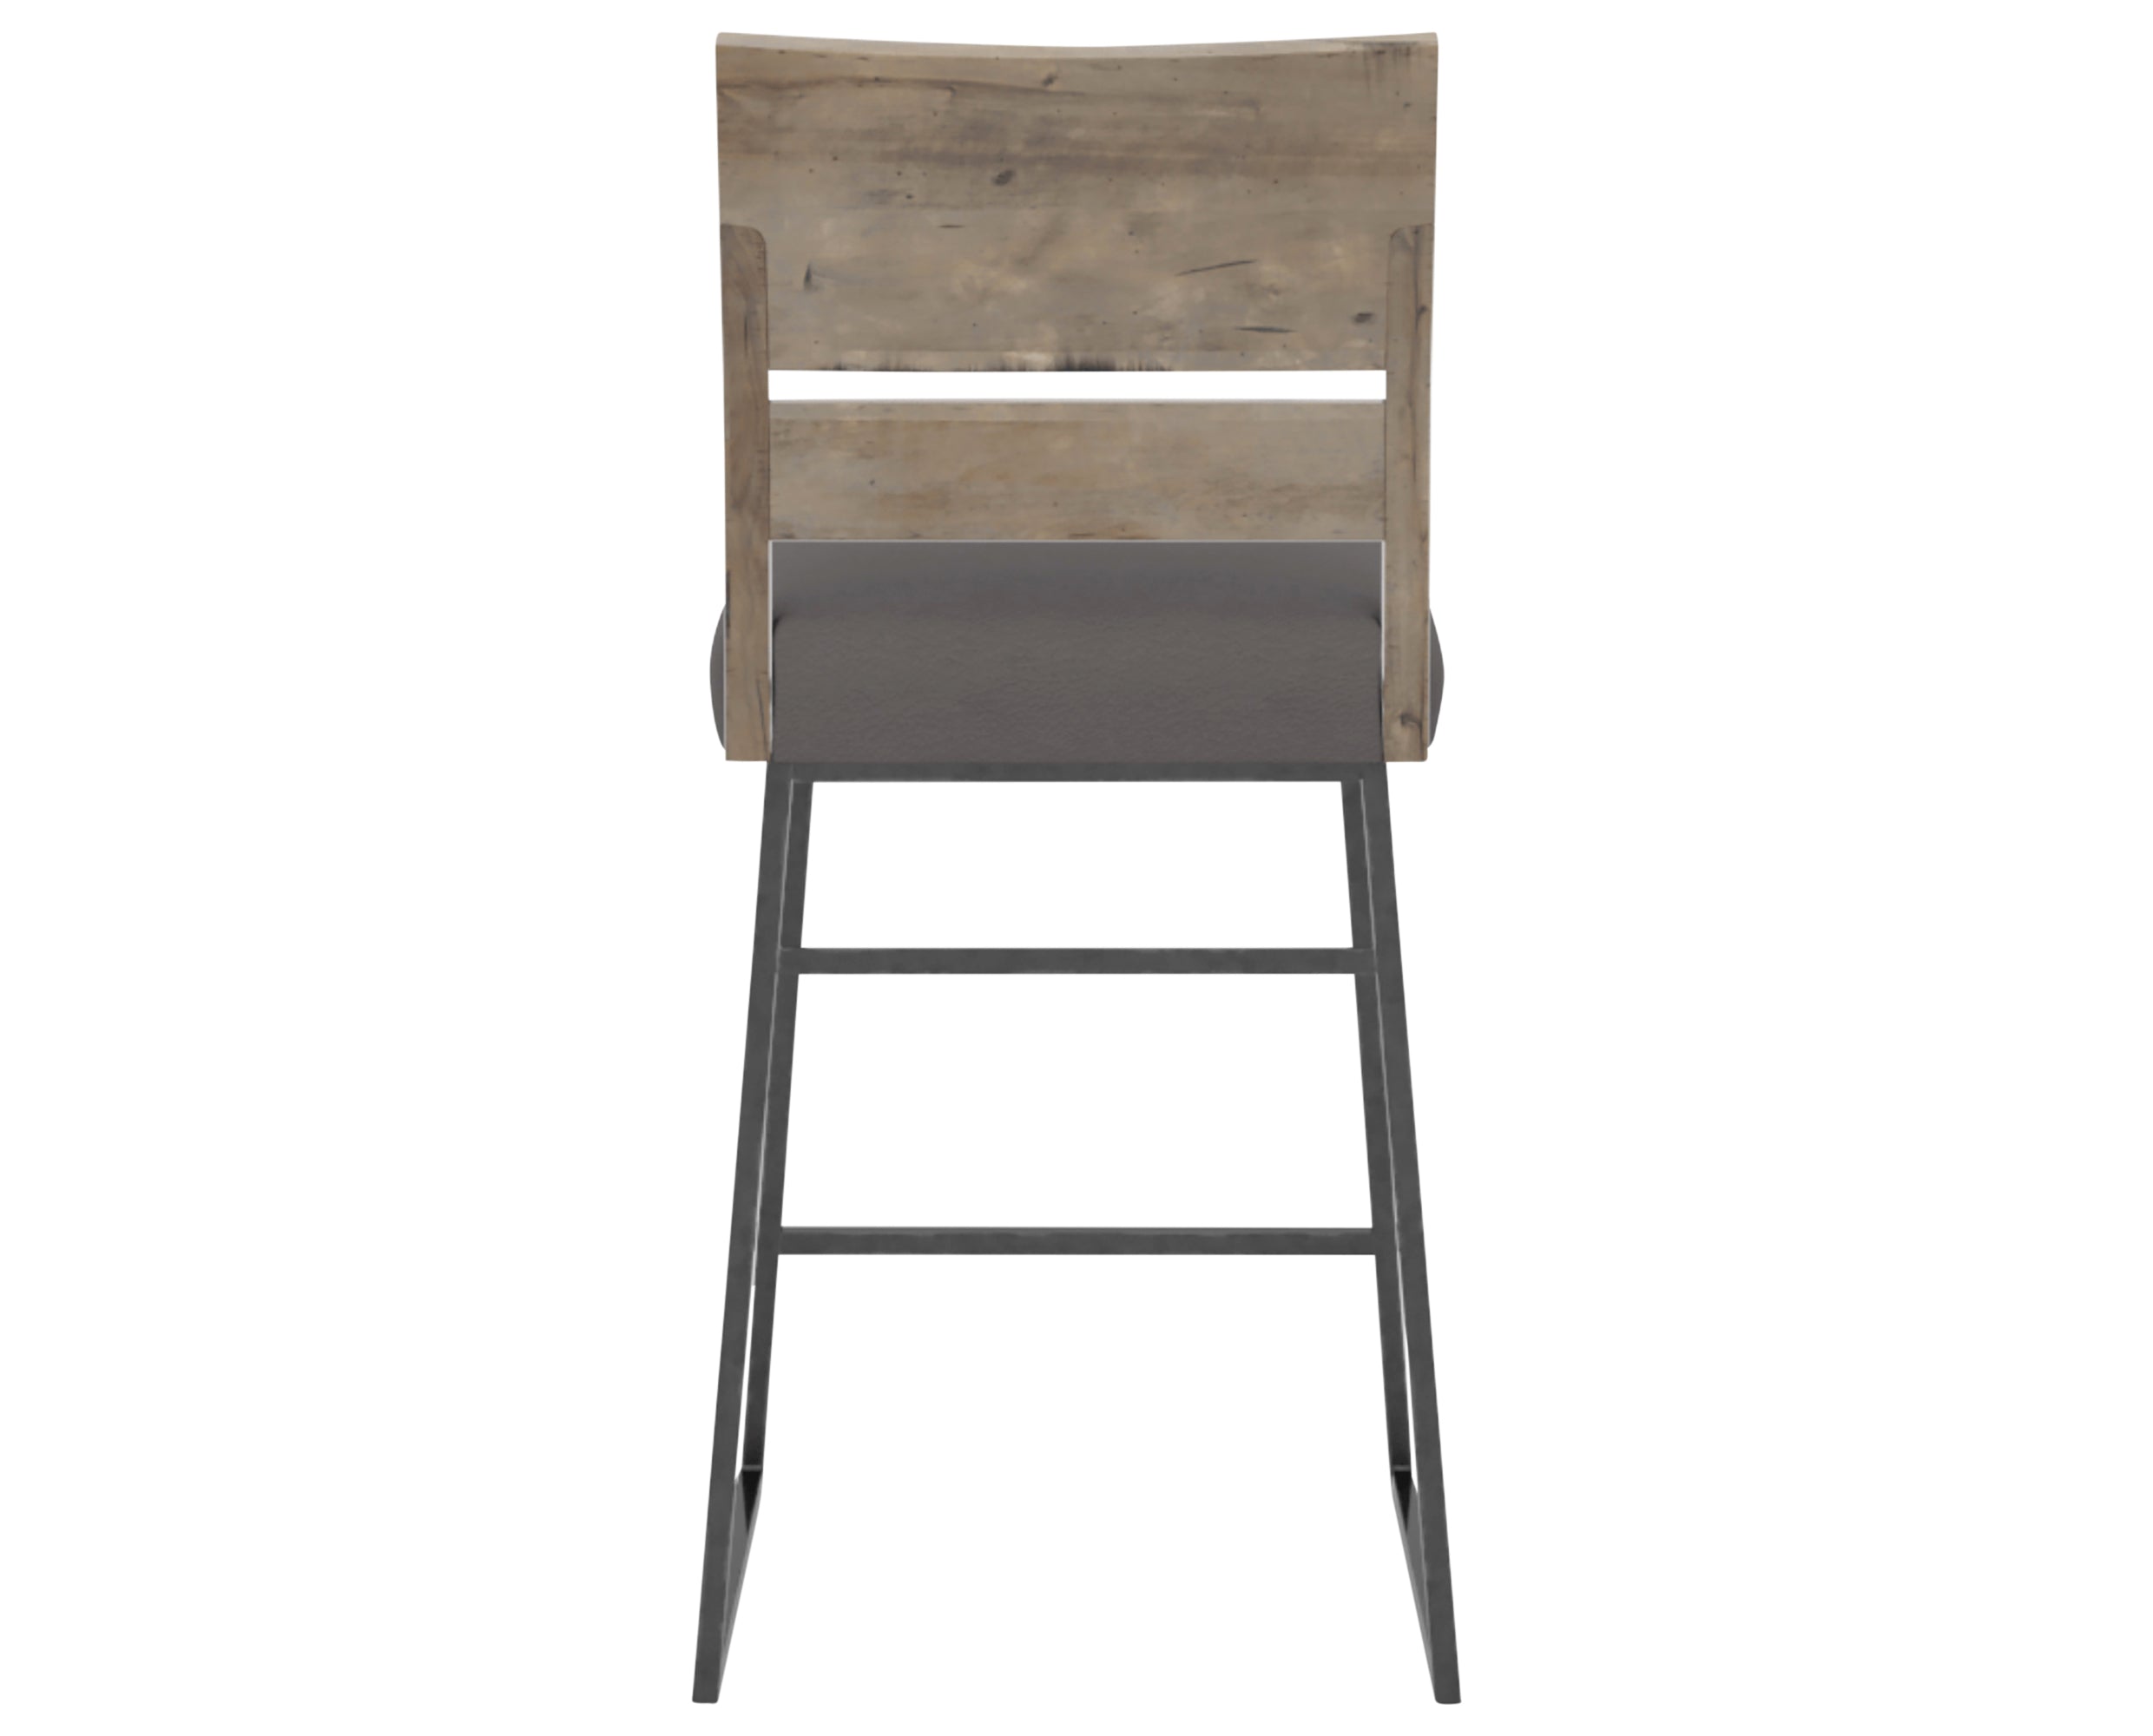 Shadow &amp; Faux Leather XU | Canadel Loft Counter Stool 8149 | Valley Ridge Furniture